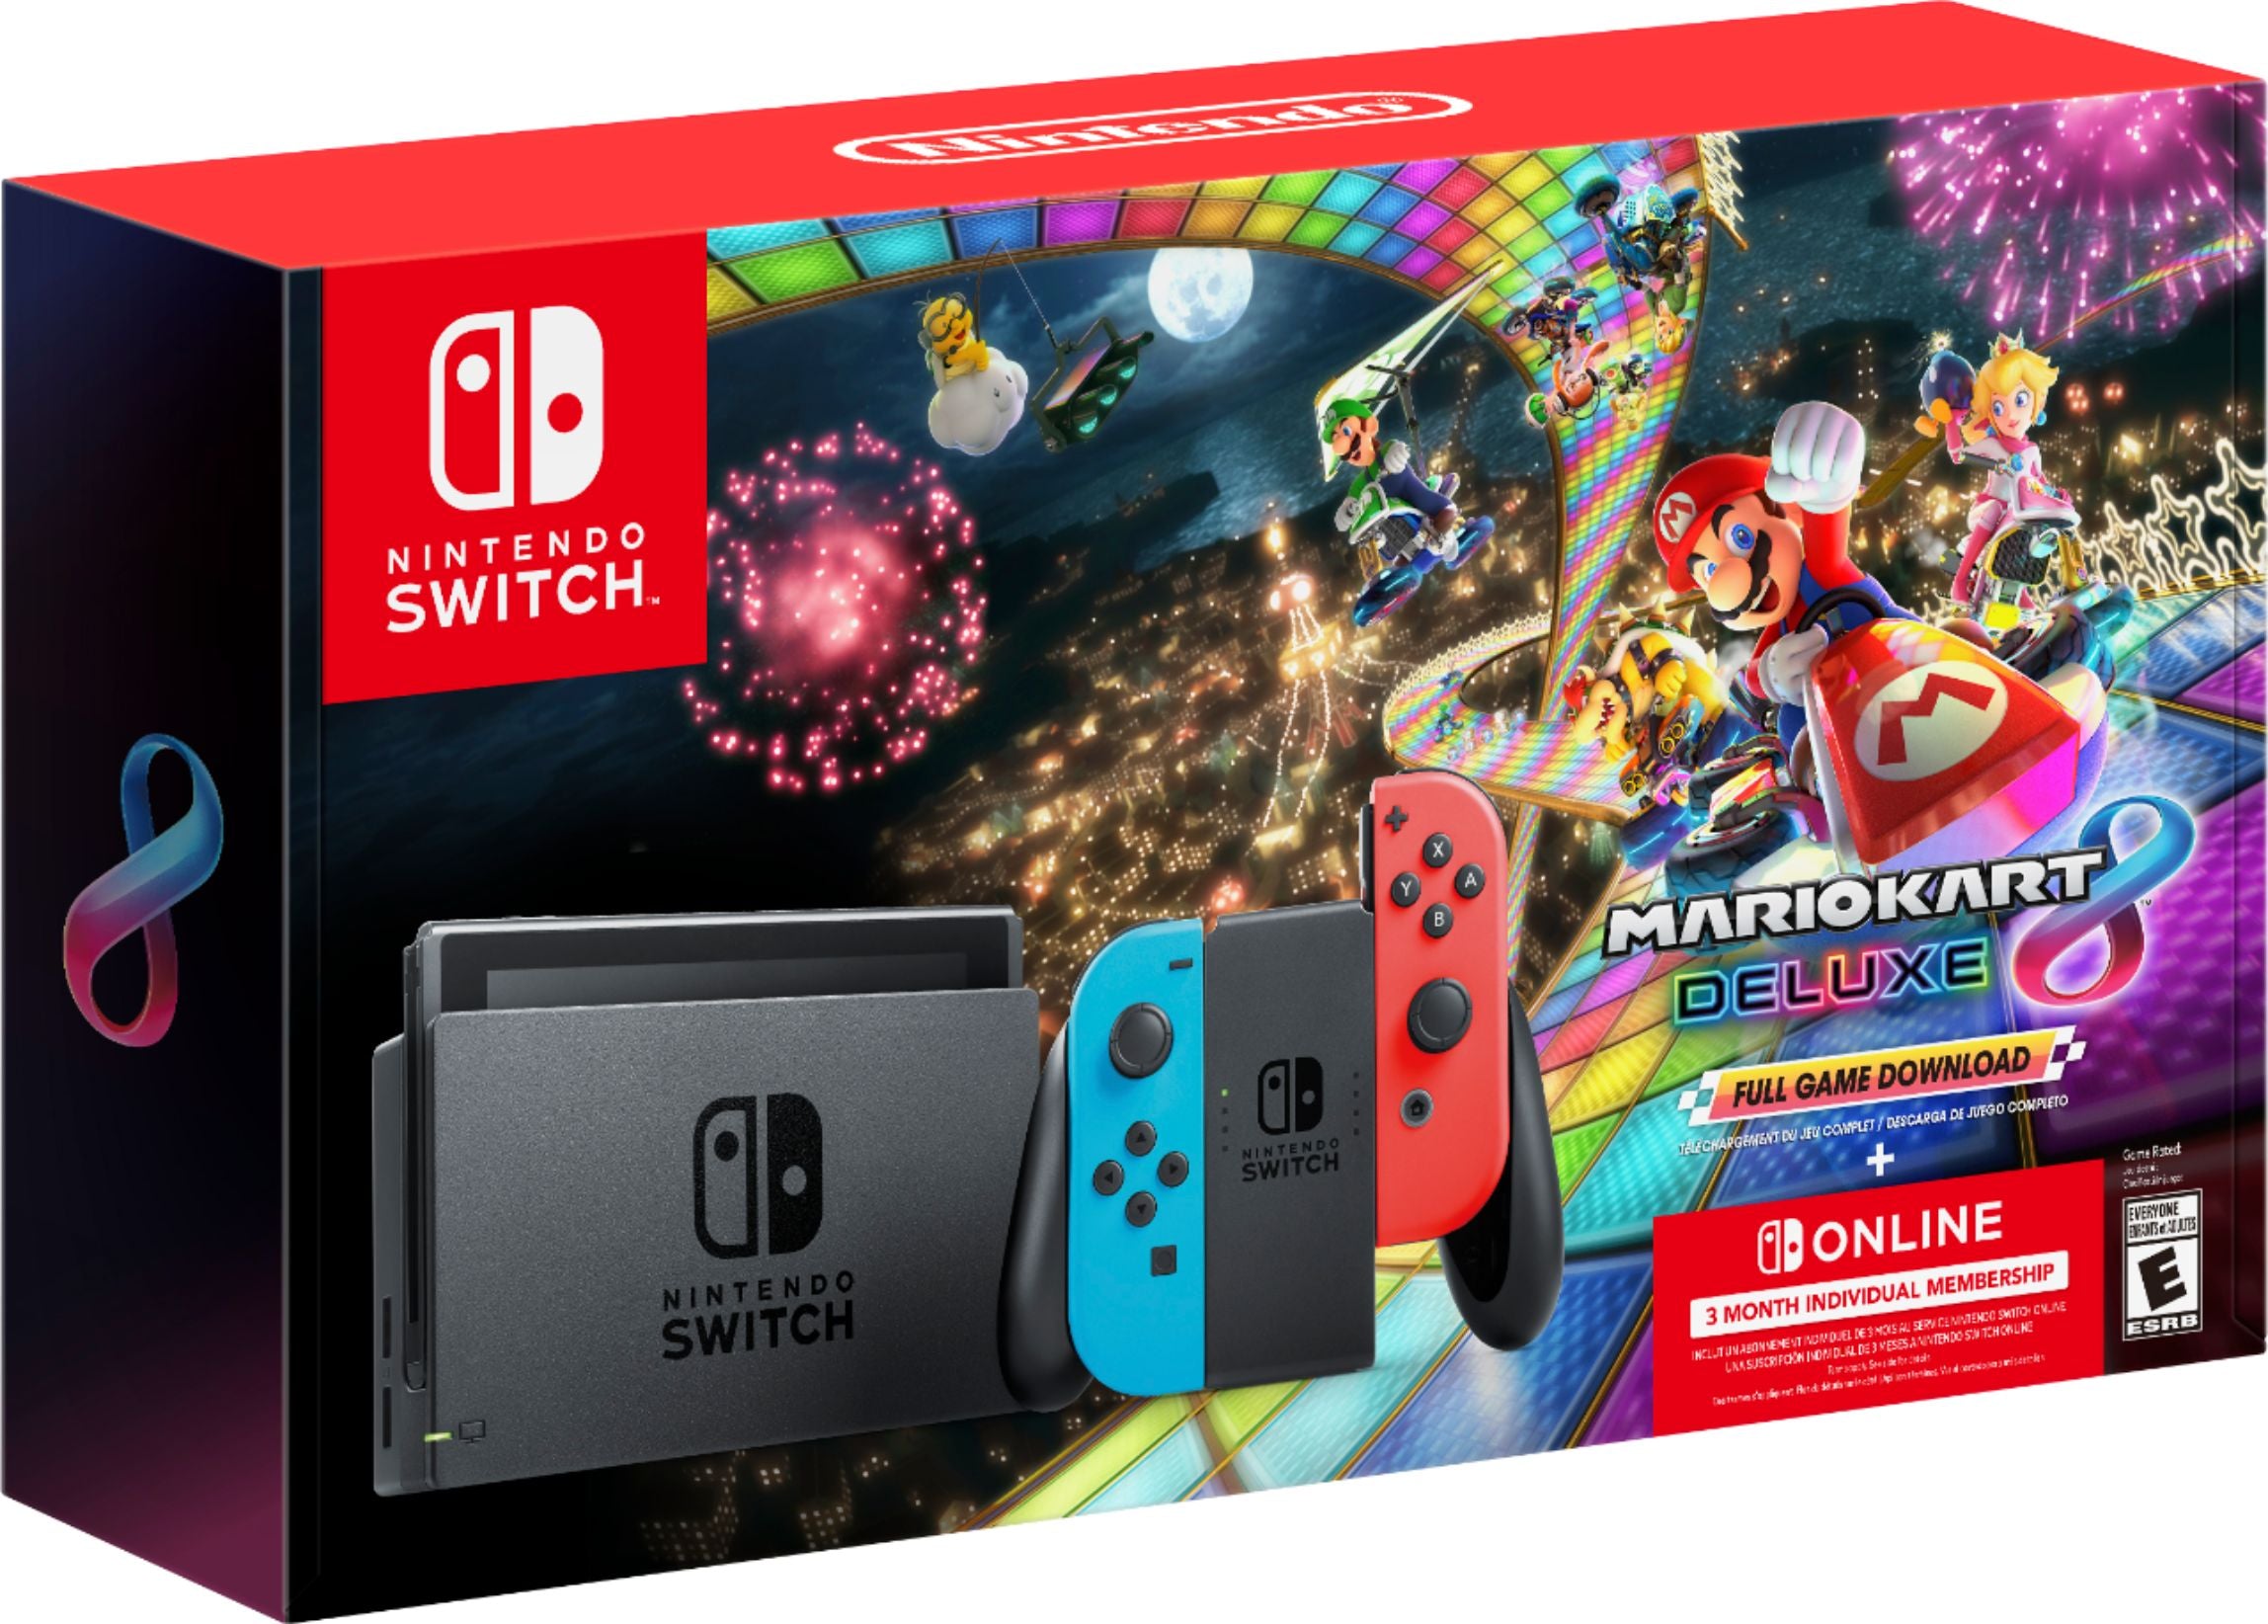 Nintendo Switch Mario Kart 8 Neon Multiplayer Racing Bundle: Red Blue JoyCon Console, Mario Kart 8 Deluxe & Online Membership, Mytrix Wheels & Grips 4 Pcs, Additional Red/Blue JoyCons